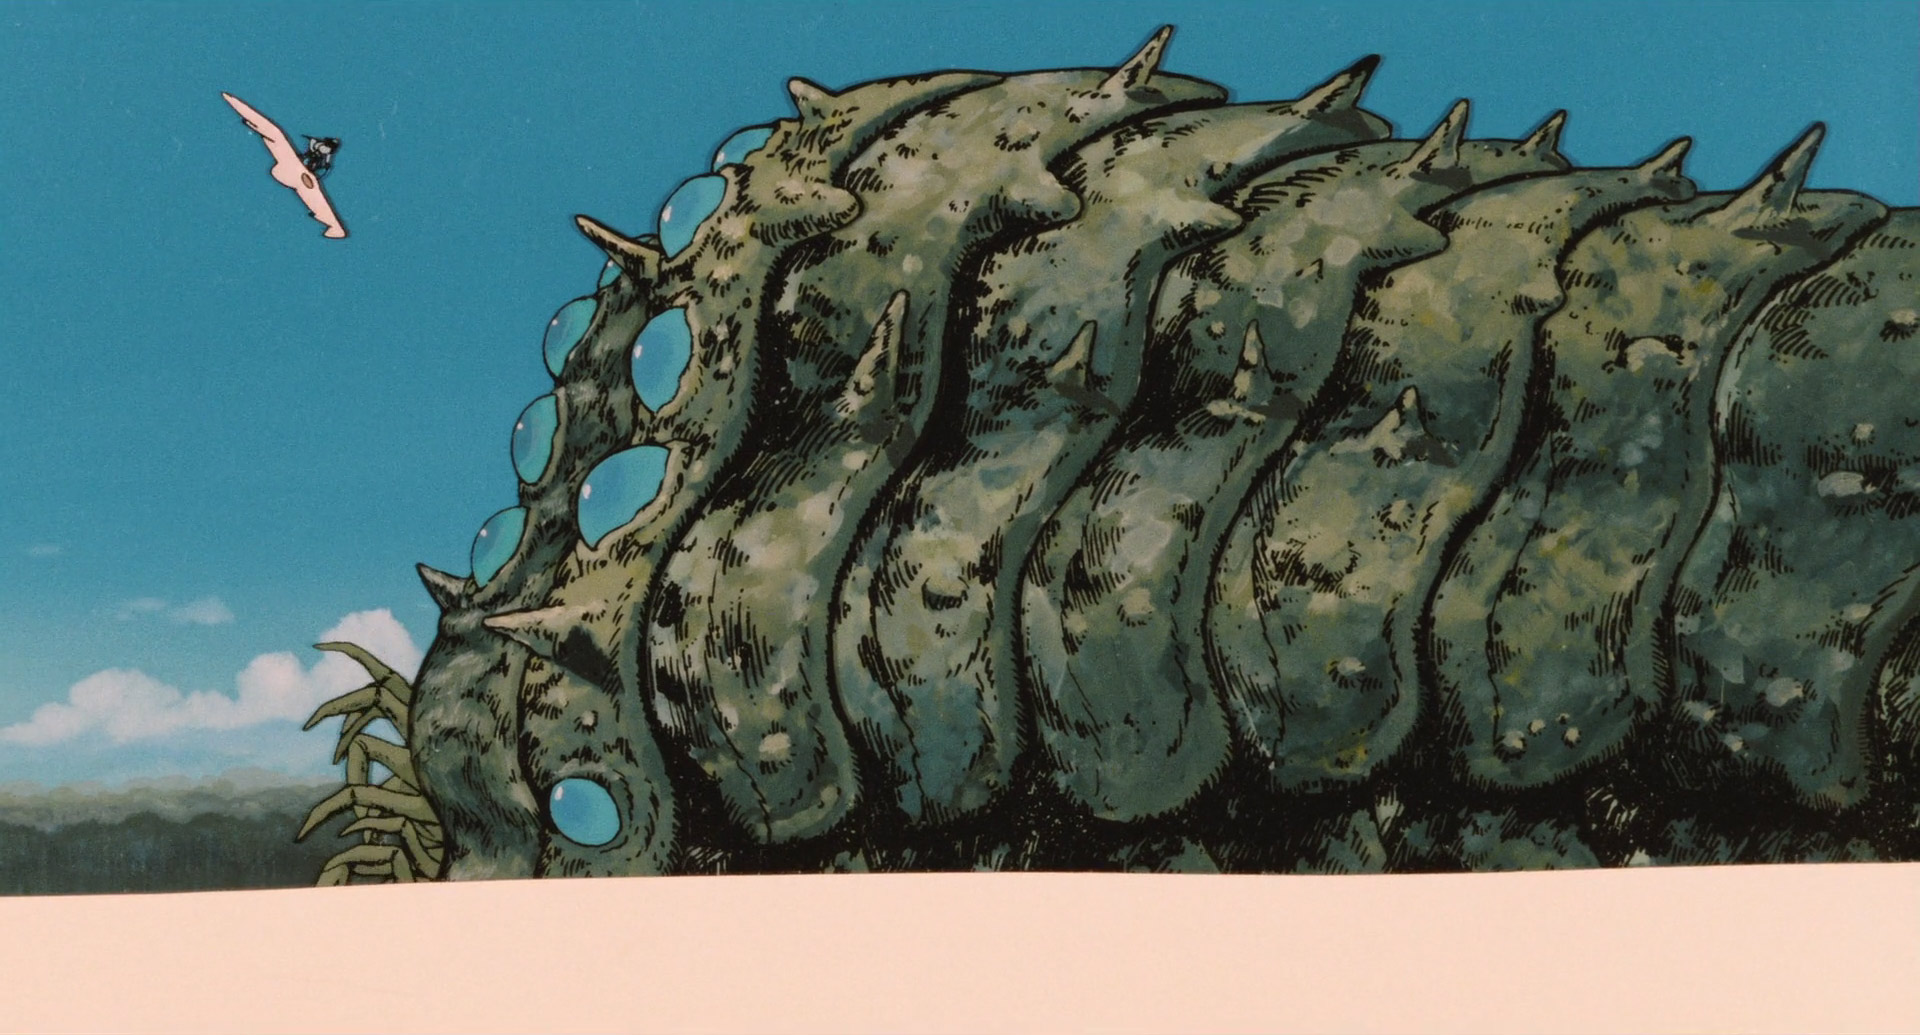 Nausicaä of the Valley of the Wind